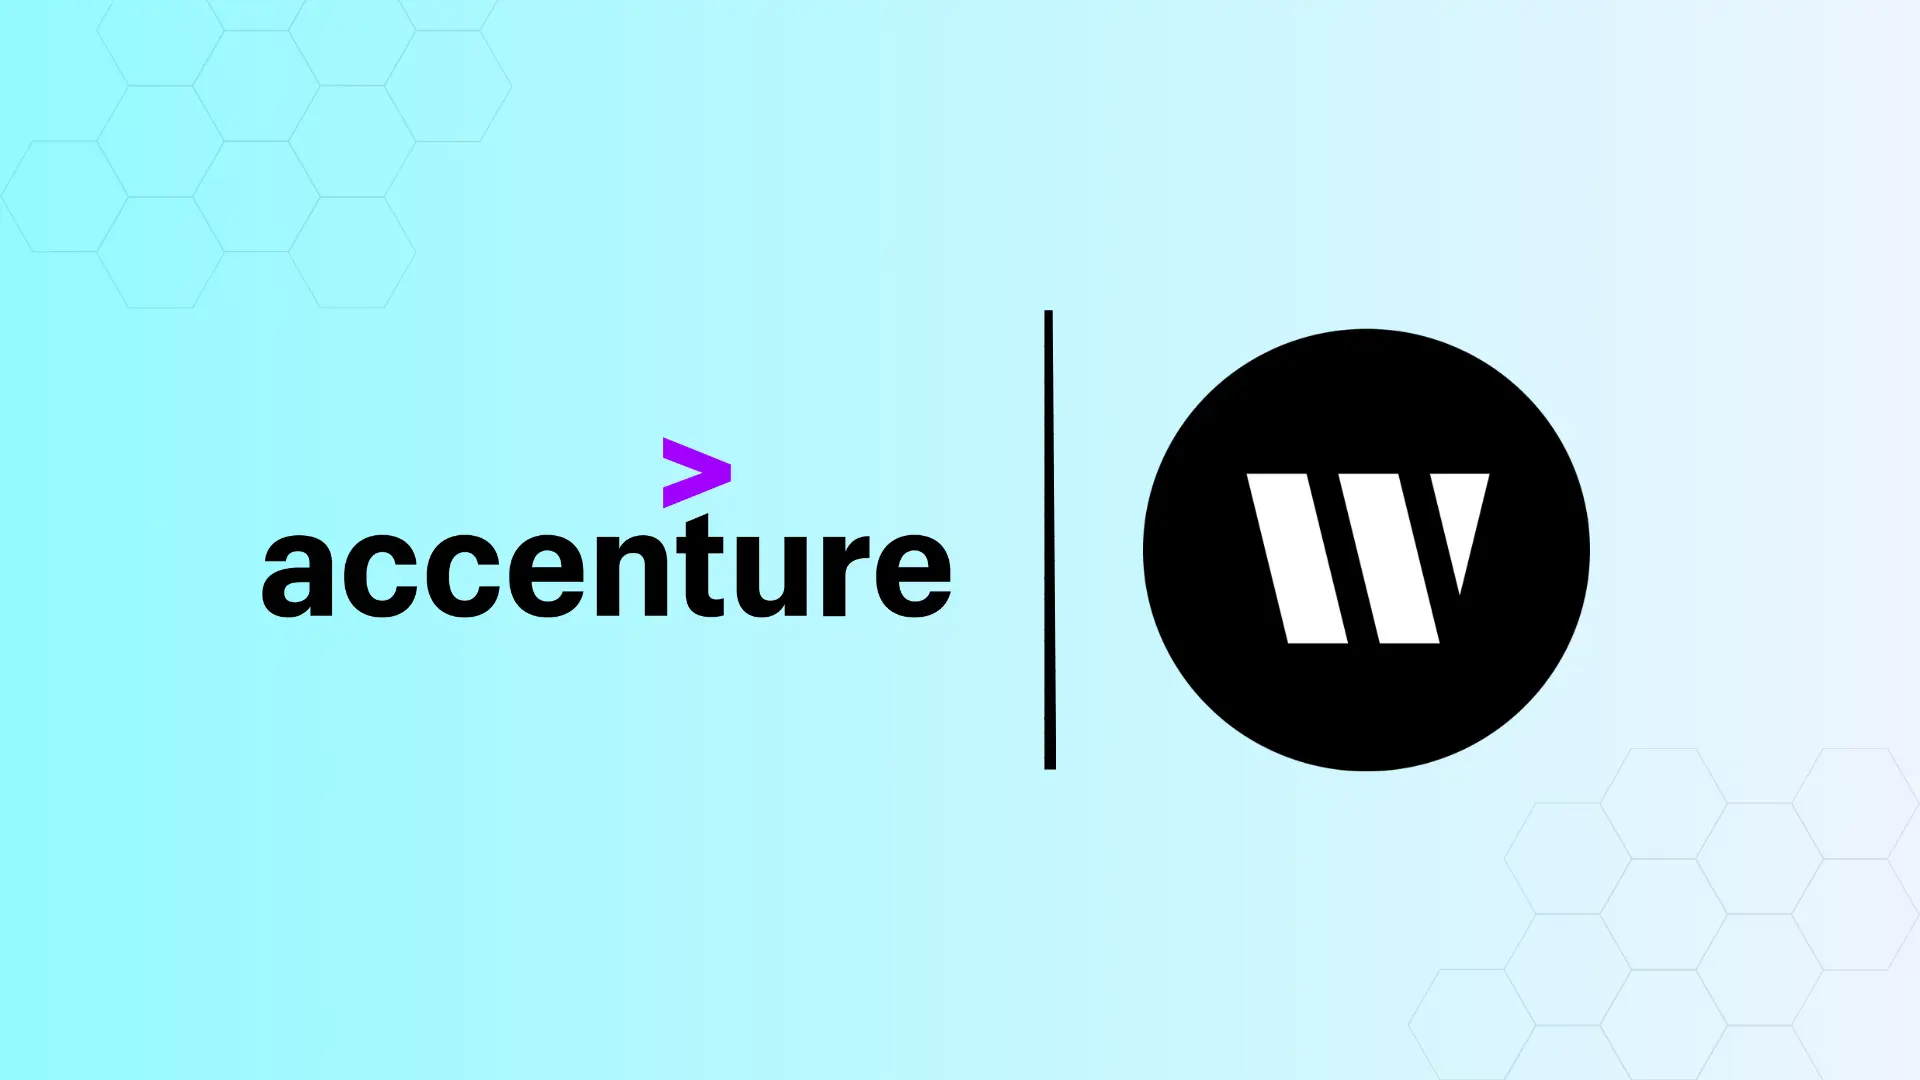 Accenture invests in Writer to advance enterprise use of generative AI